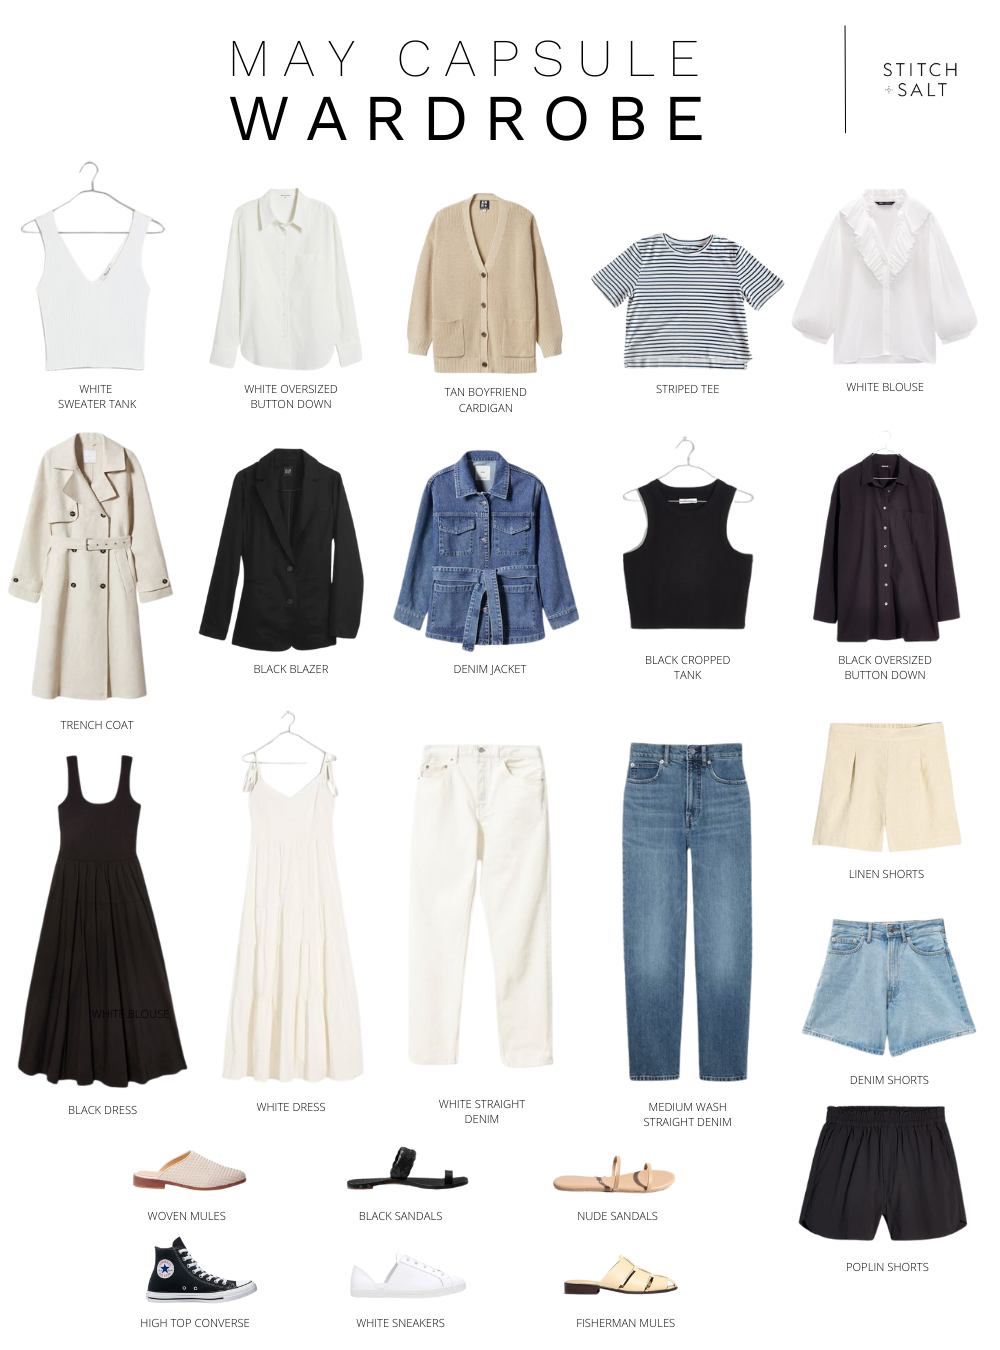 PETITE* Spring Outfit Ideas!, Outfit Ideas For Petites